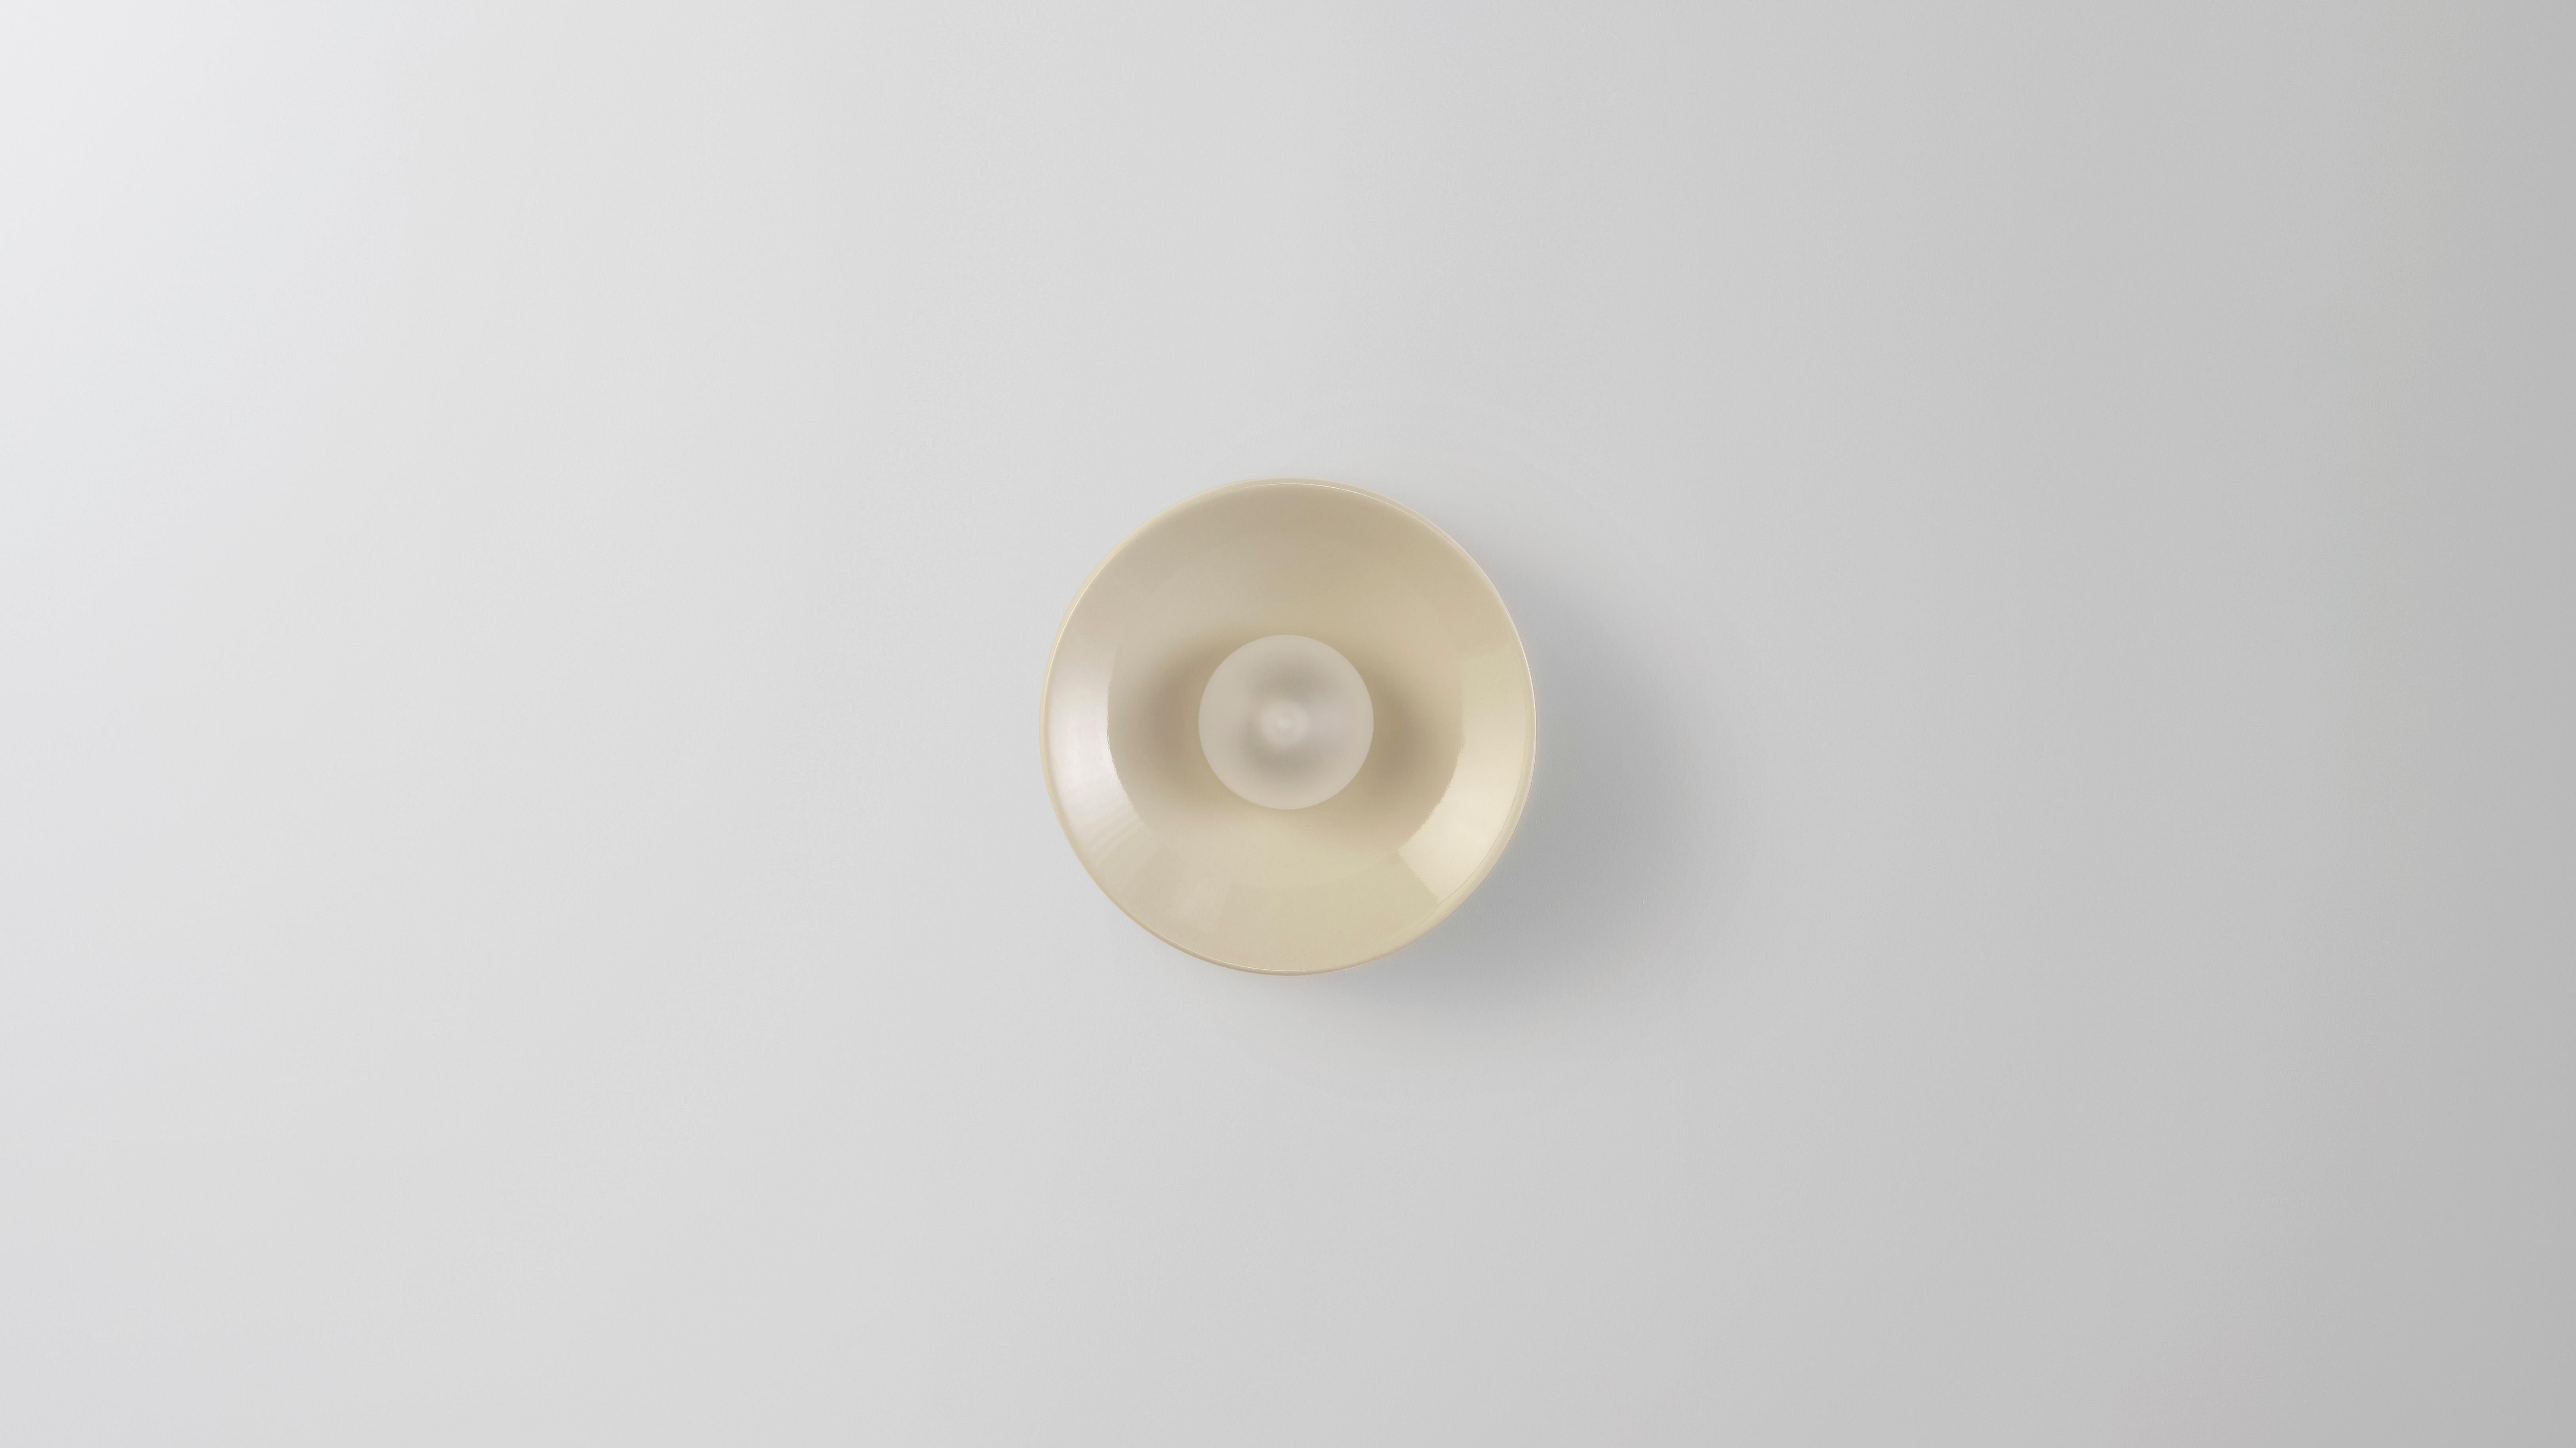 Mini ceramic Anton wall scounce by Volker Haug.
Dimensions: Ø 13 x D 8 cm.
Material: Cast Ceramic
Glaze: a selection of colours are available
Lamp: G9 LED (240V / 120V US). 12V option is available.
Glass Bulb: 45mm ø, Frosted
Each cast piece is